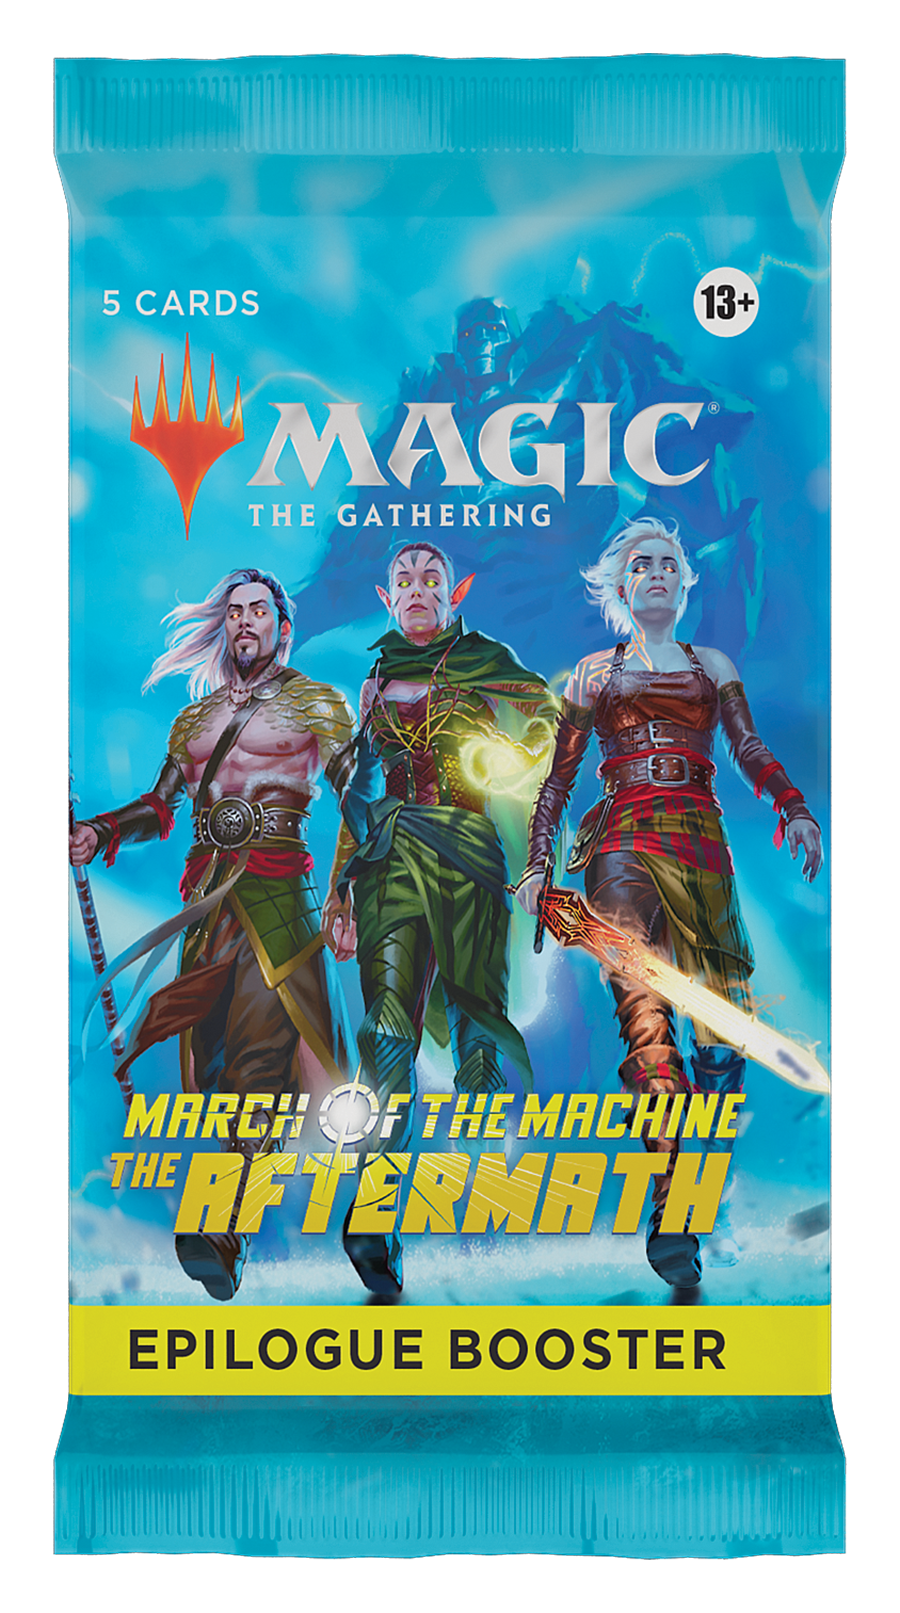 March of the Machine: The Aftermath - Epilogue Booster Pack